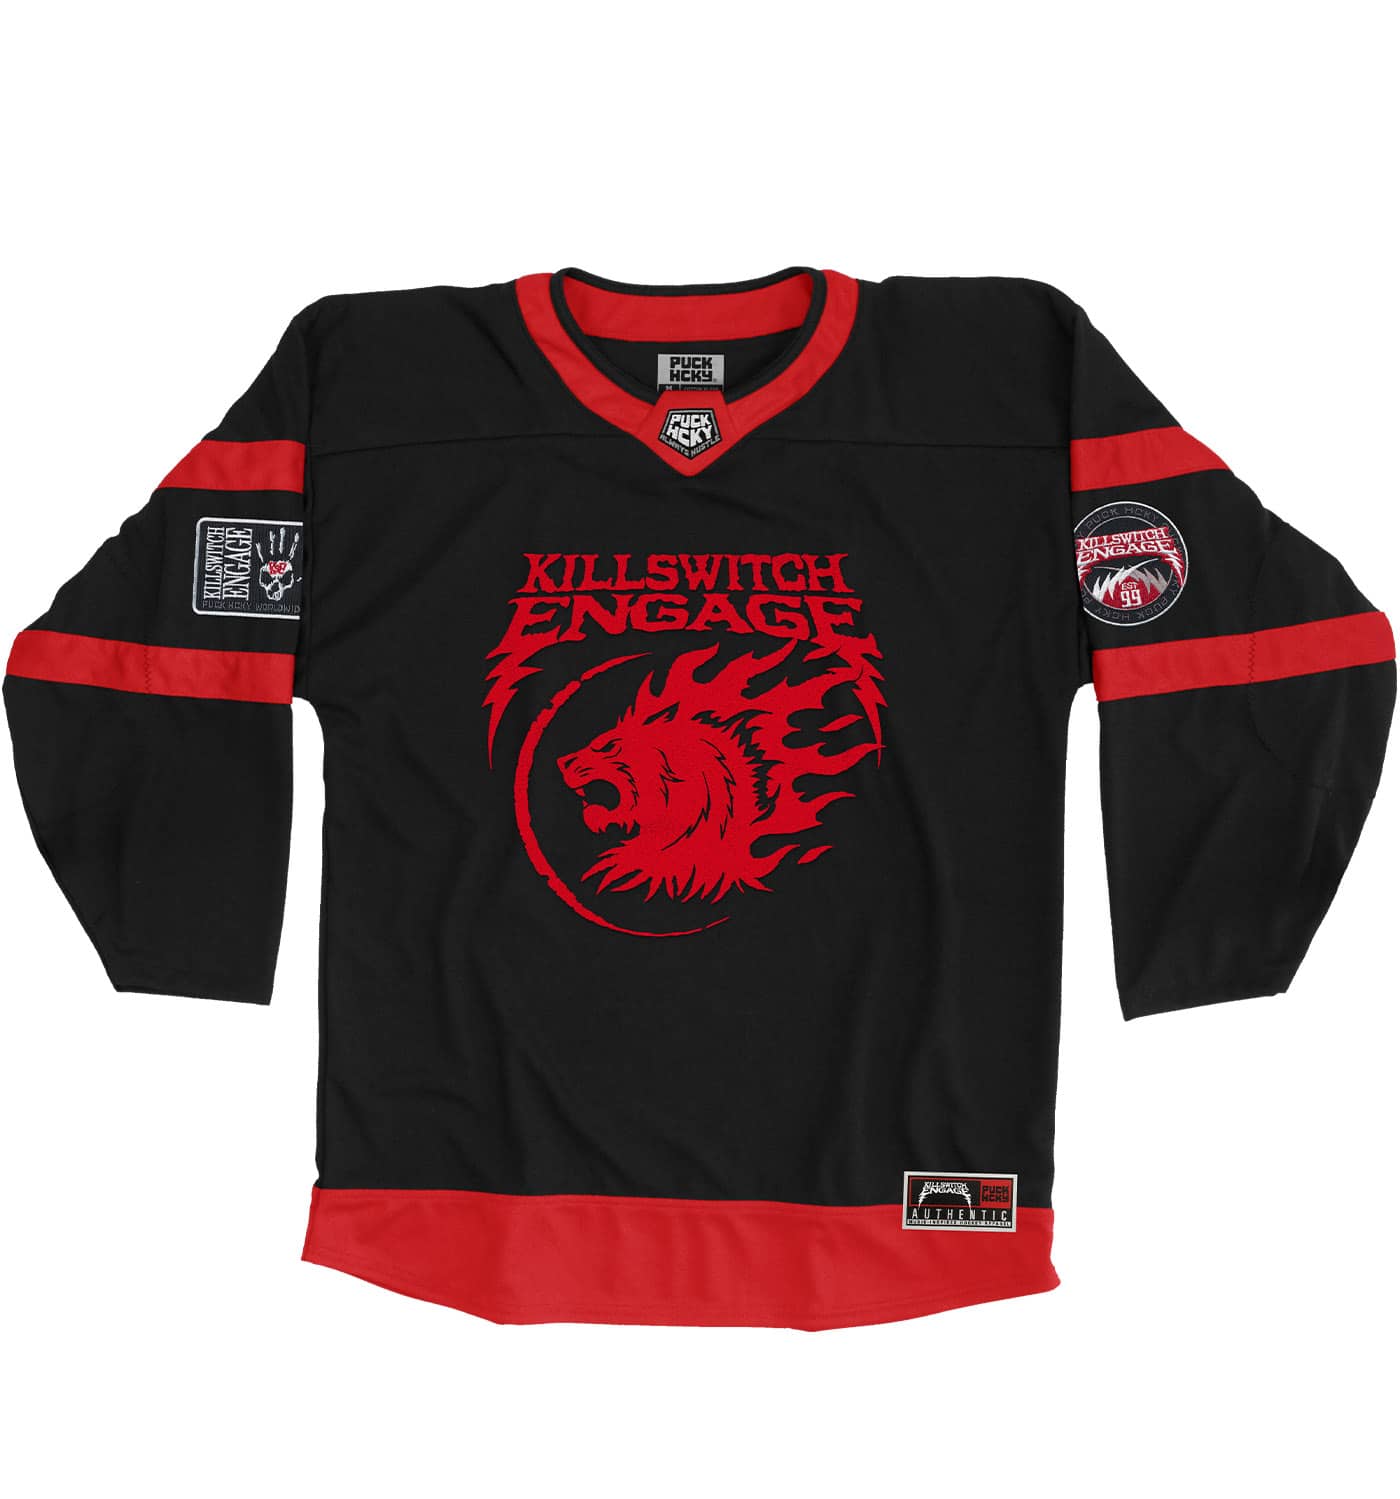 KILLSWITCH ENGAGE 'SKATE BY DESIGN' HOCKEY JERSEY (BLACK/RED) – PUCK HCKY